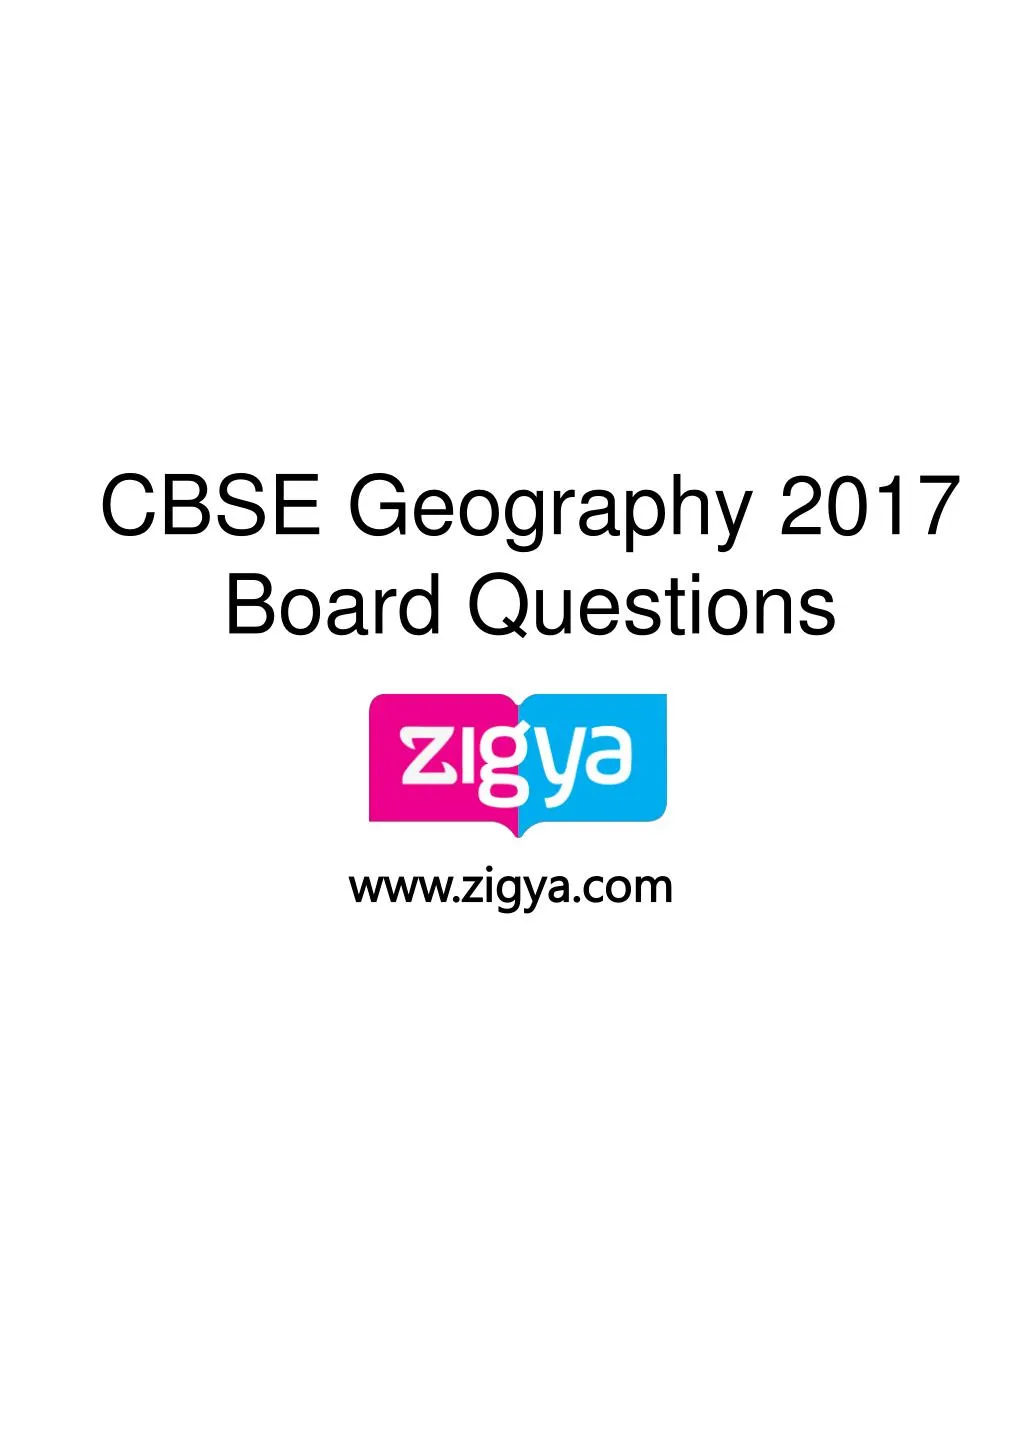 cbse geography 2017 board questions